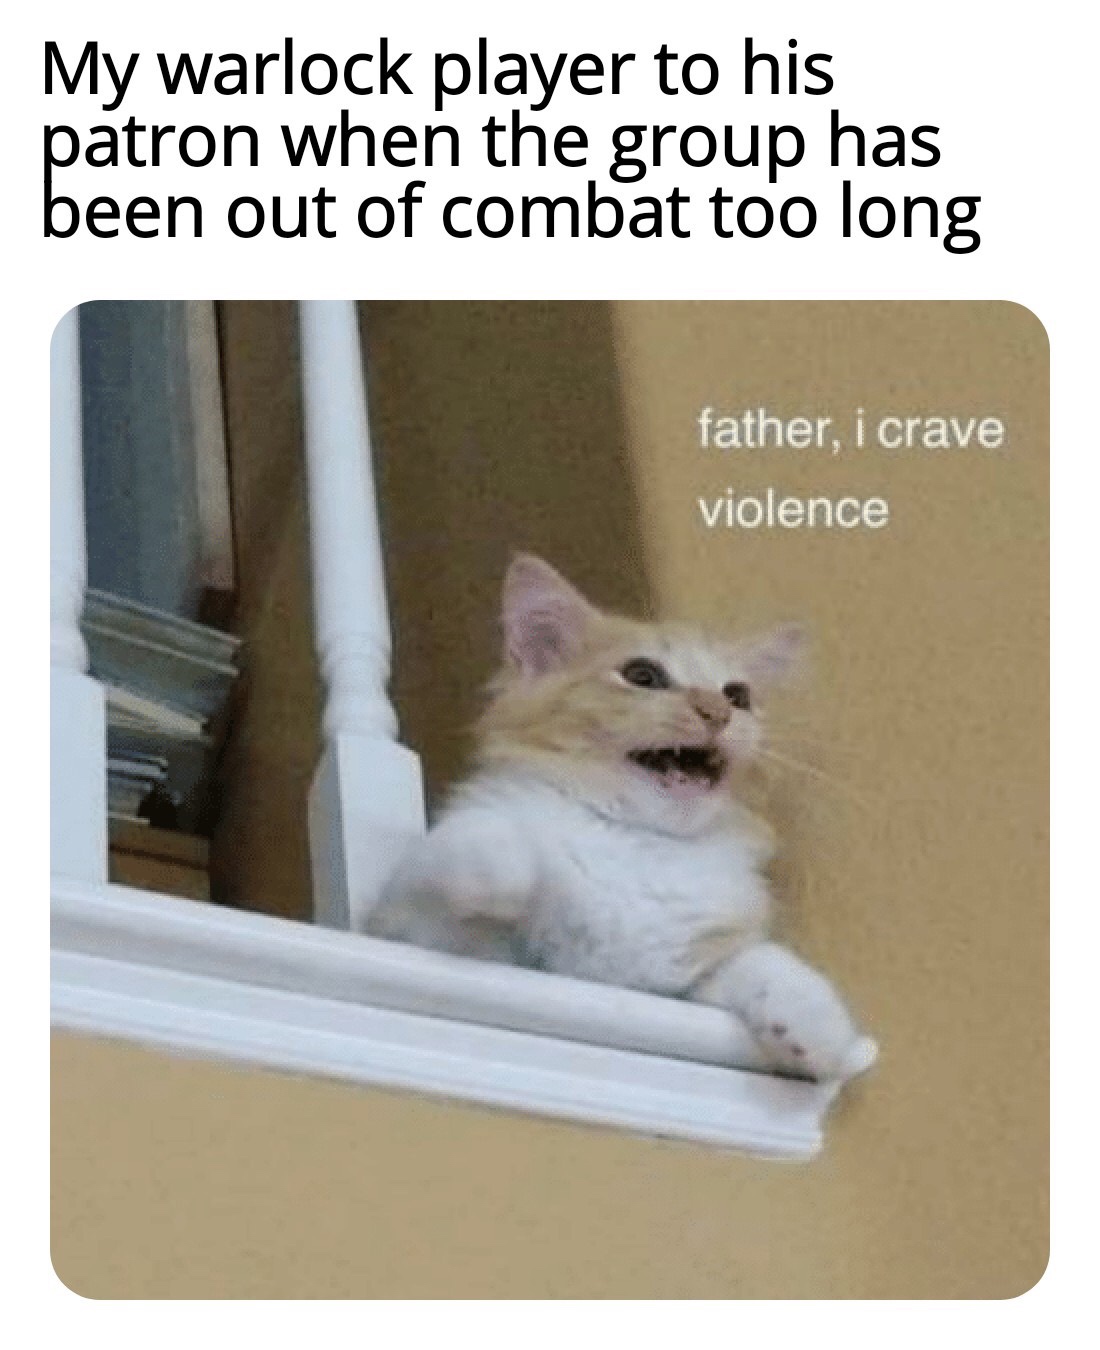 father i crave violence - My warlock player to his patron when the group has been out of combat too long father, i crave violence